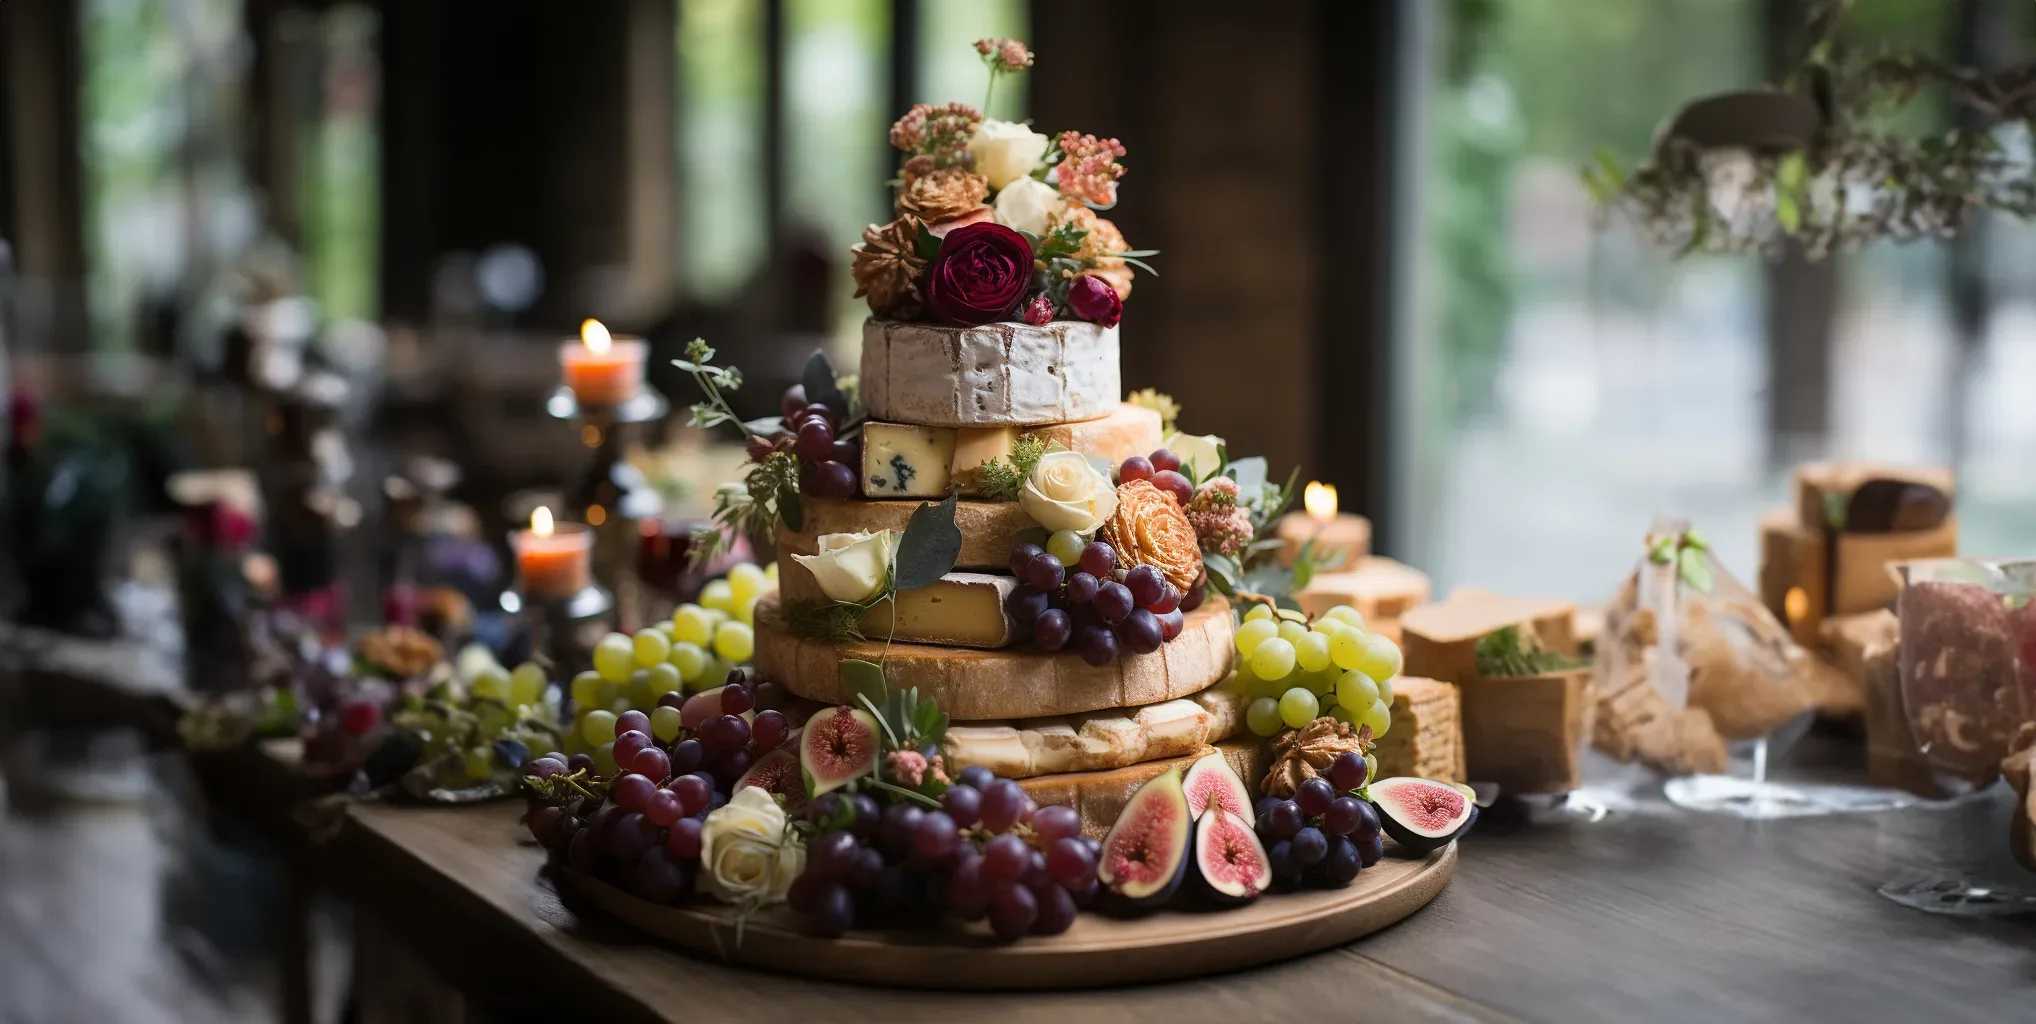 A cheese cake with fruit and grapes on top. CHEESE WEDDING CAKE